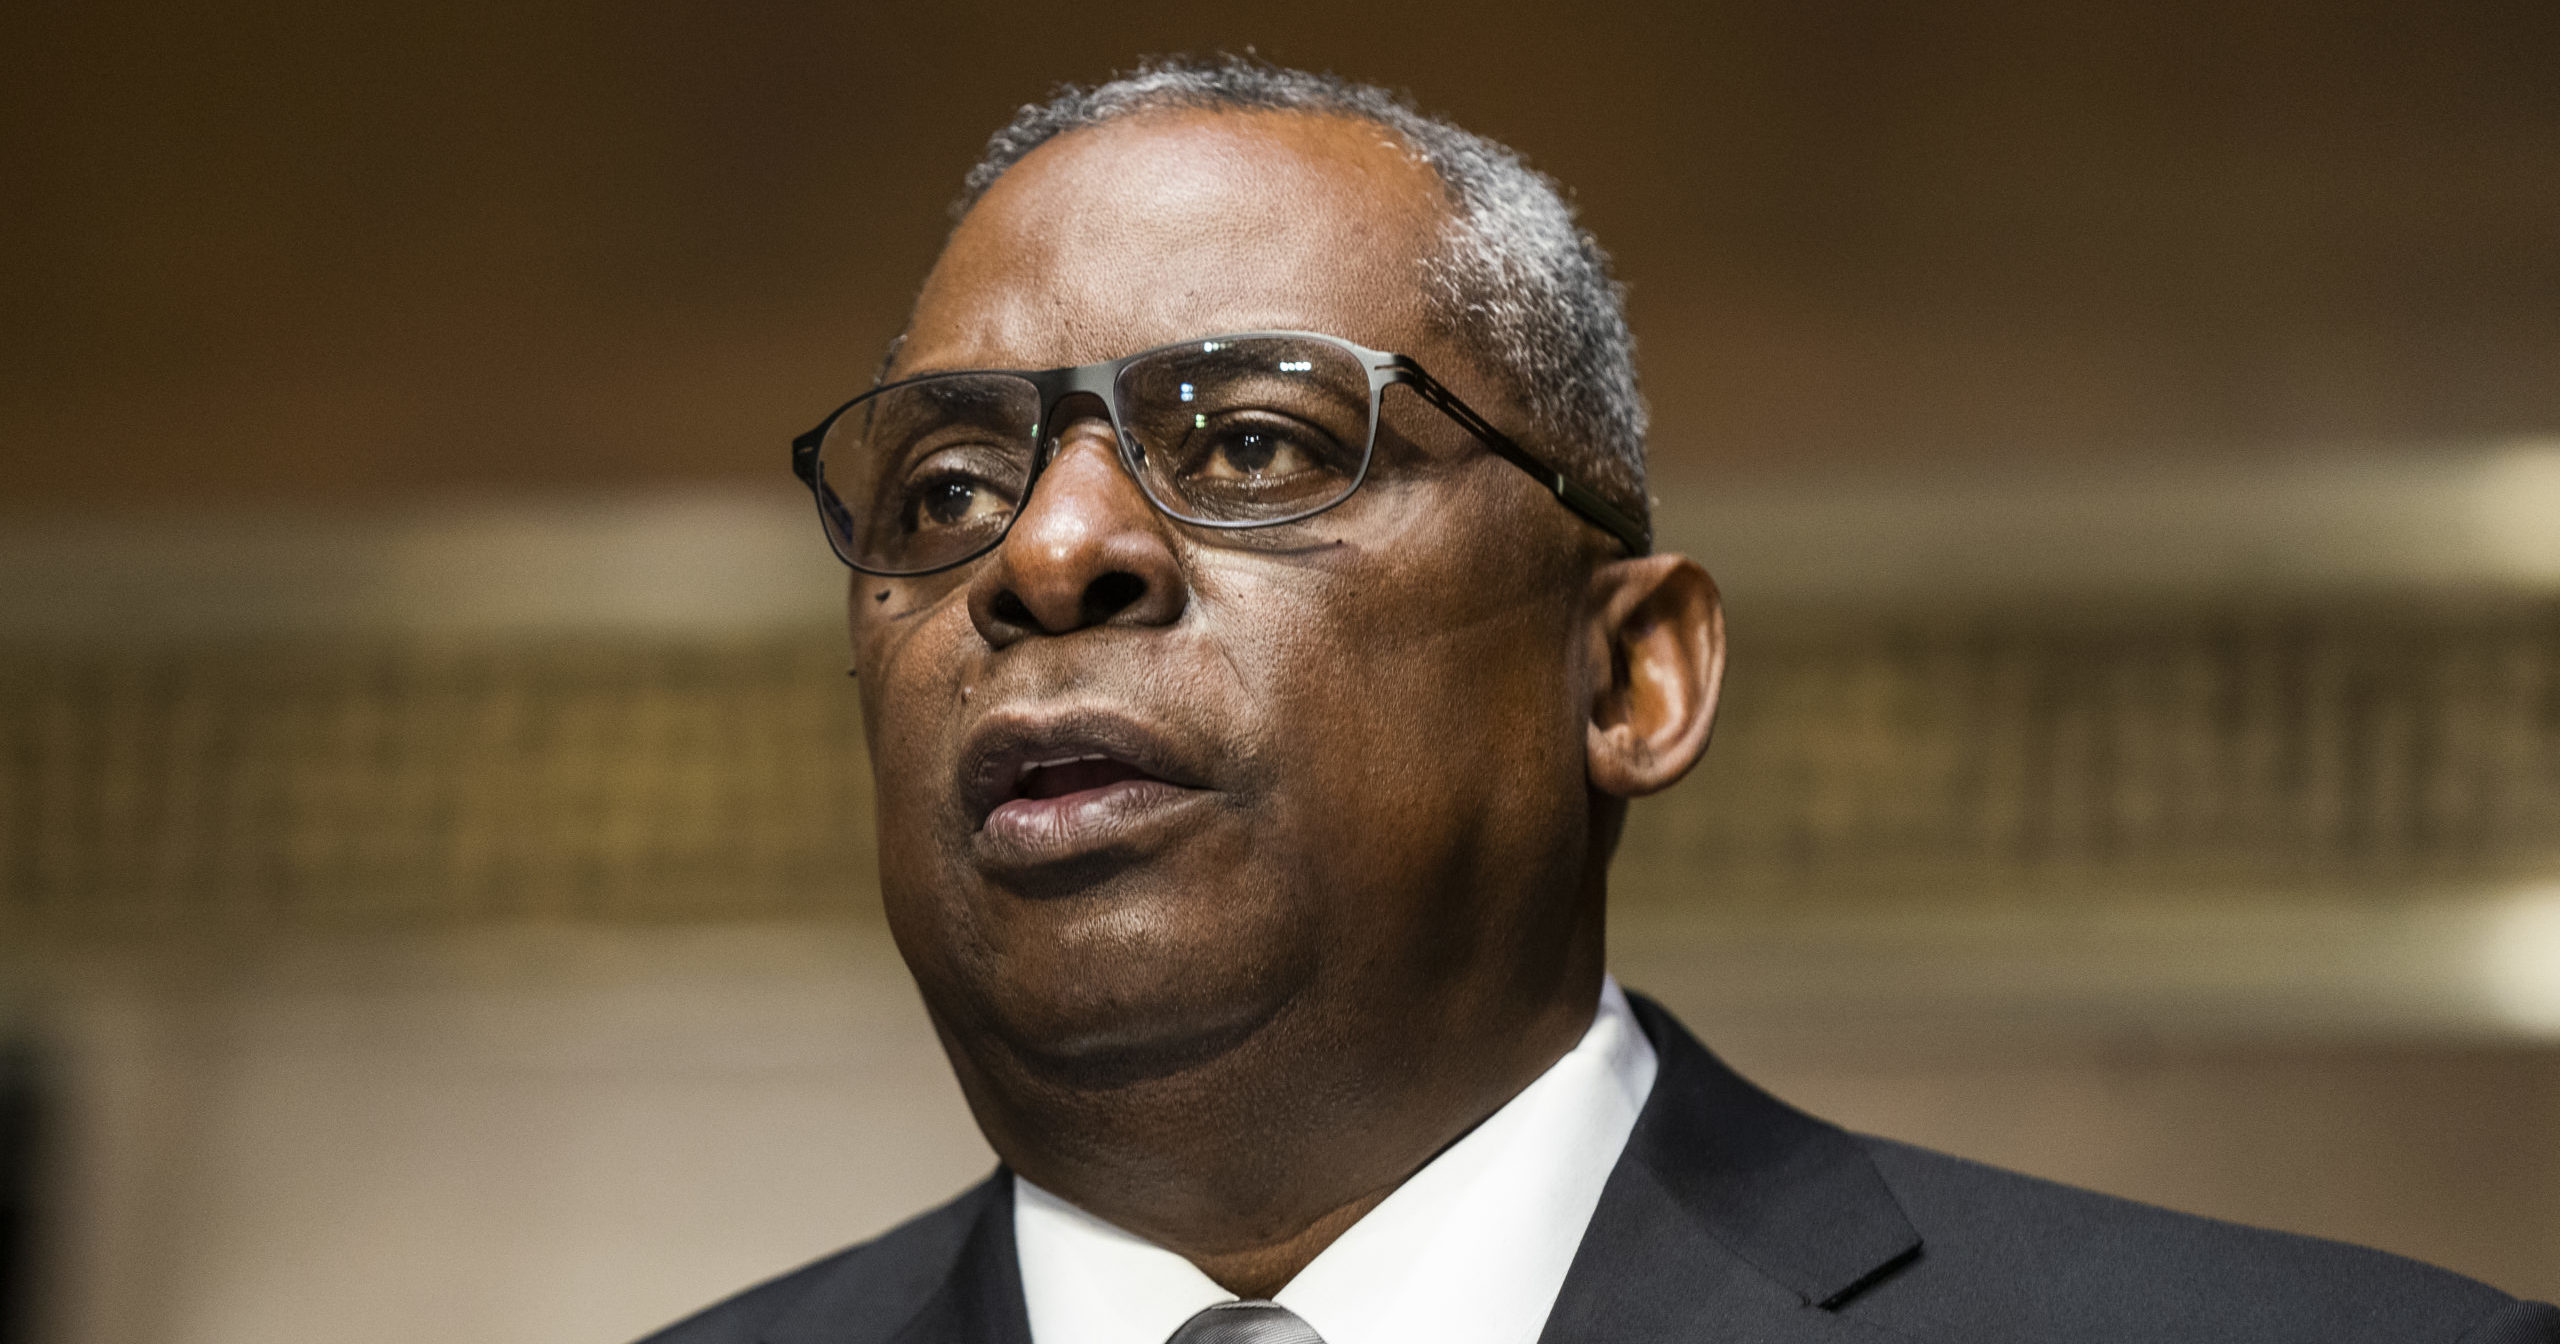 Secretary of Defense nominee Lloyd Austin, a recently retired Army general, speaks during his conformation hearing before the Senate Armed Services Committee on Capitol Hill on Jan. 19, 2021, in Washington, D.C.